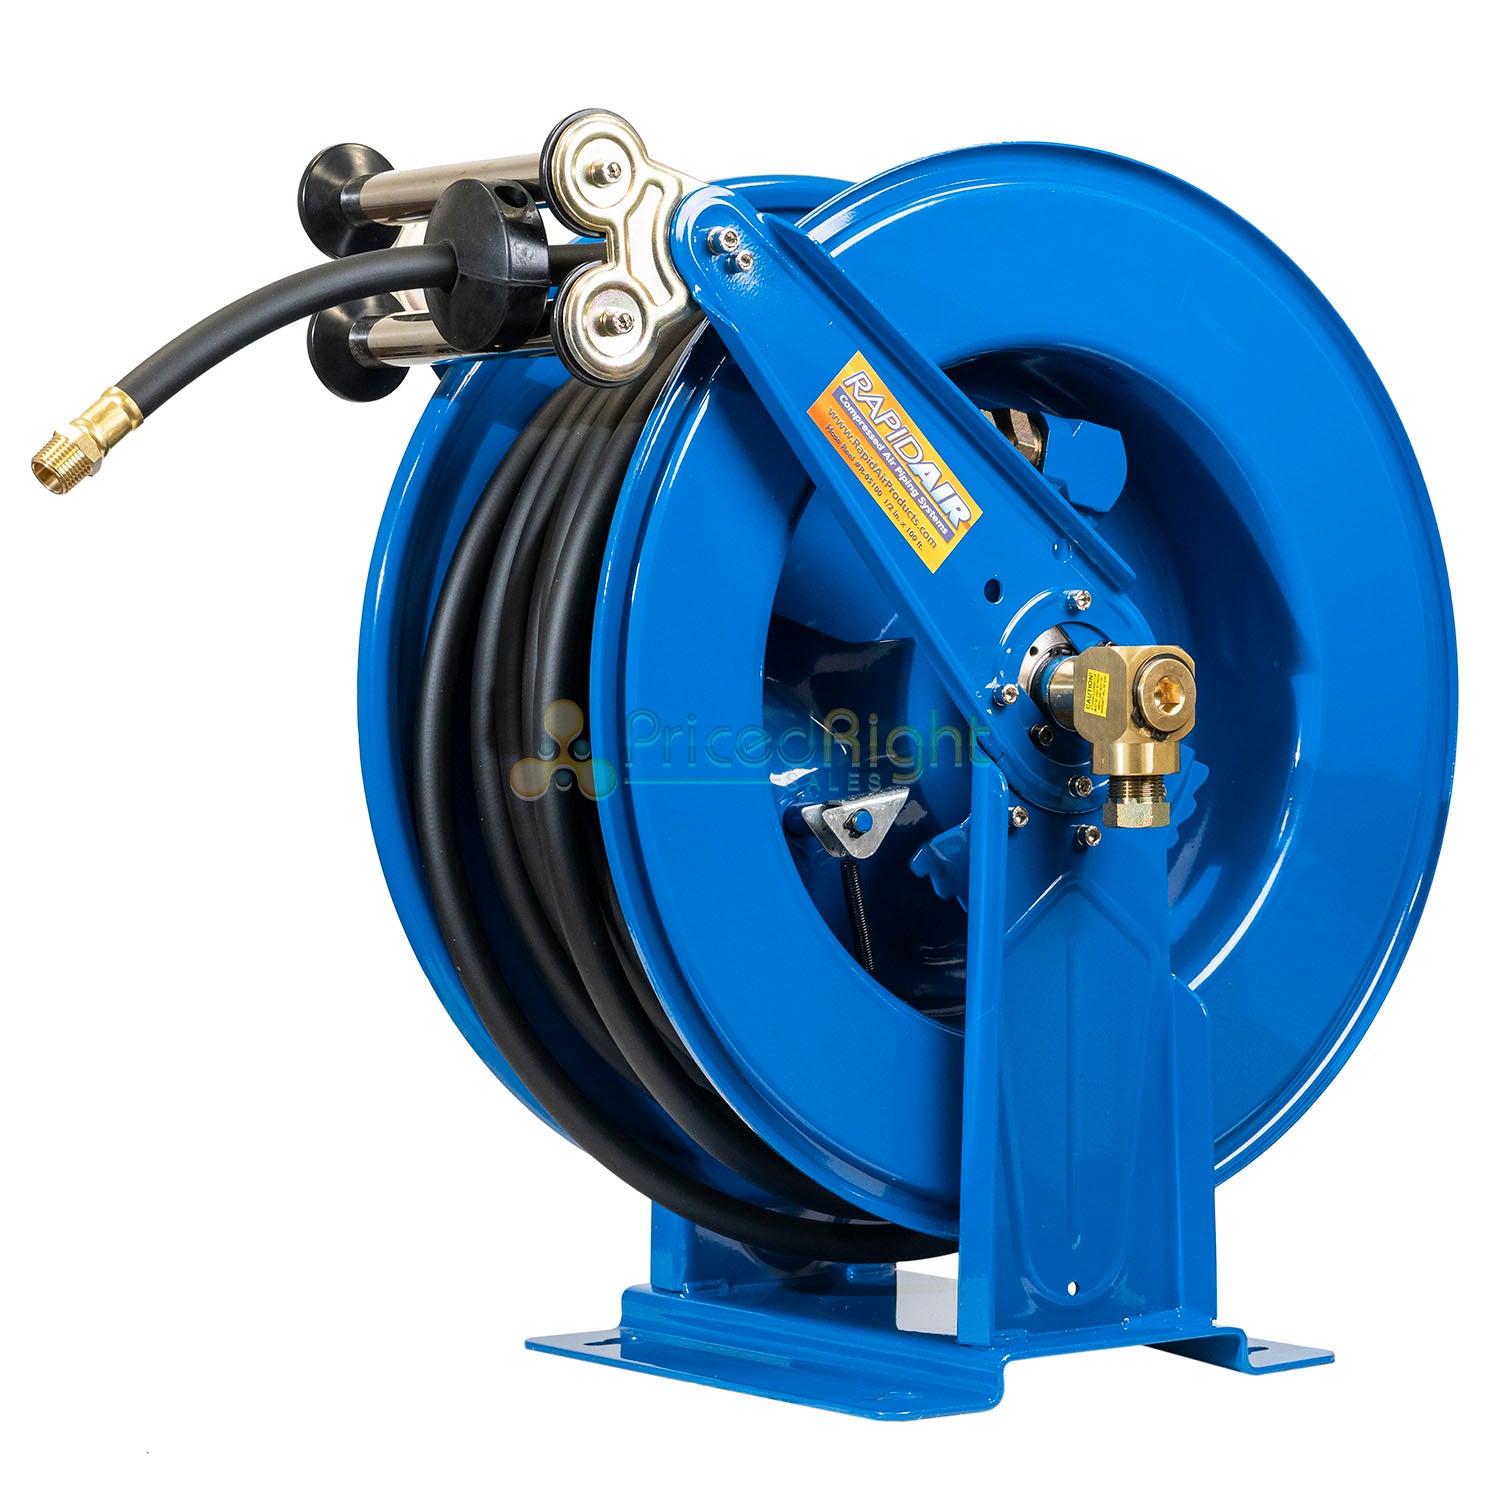 Rapidair 1/2 x 100' Dual Arm Steel Hose Reel 1/2 Inlet and Outlet R- –  Pricedrightsales